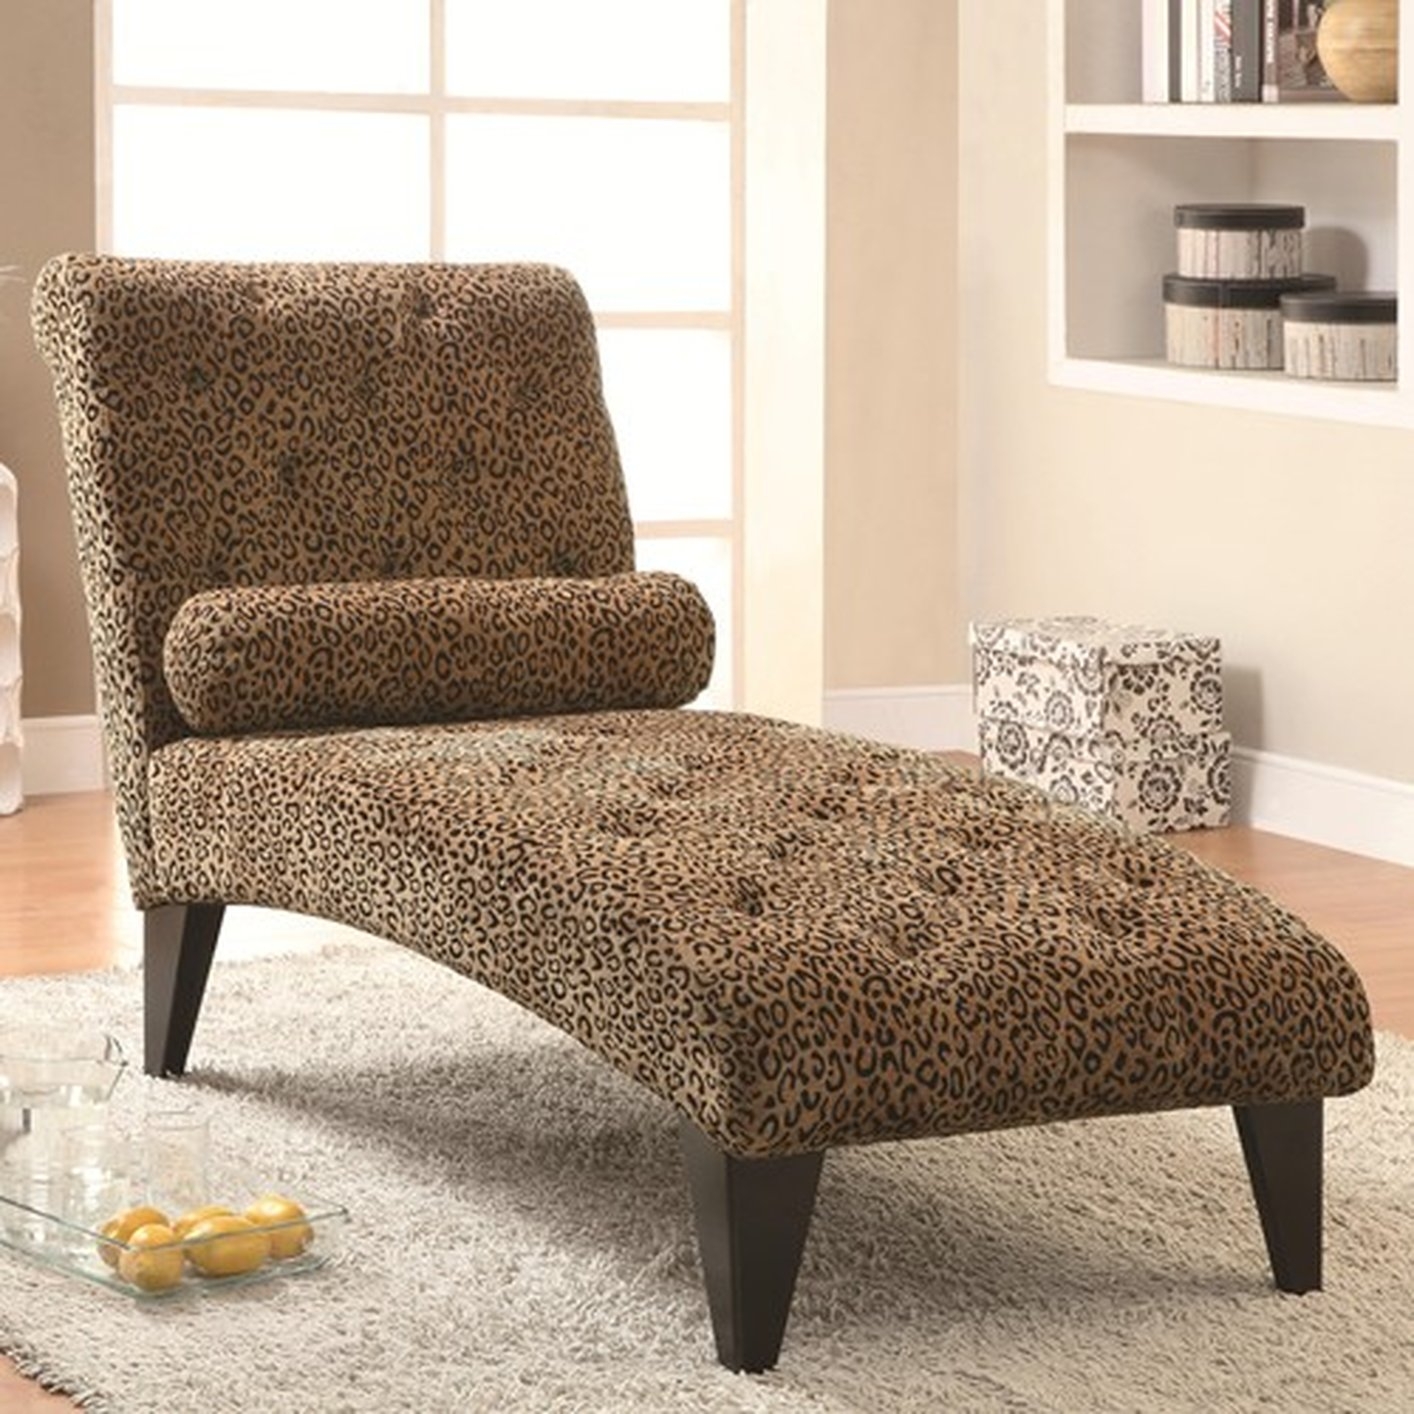 Coaster Leopard Print Living Room Armless Chaise in Black